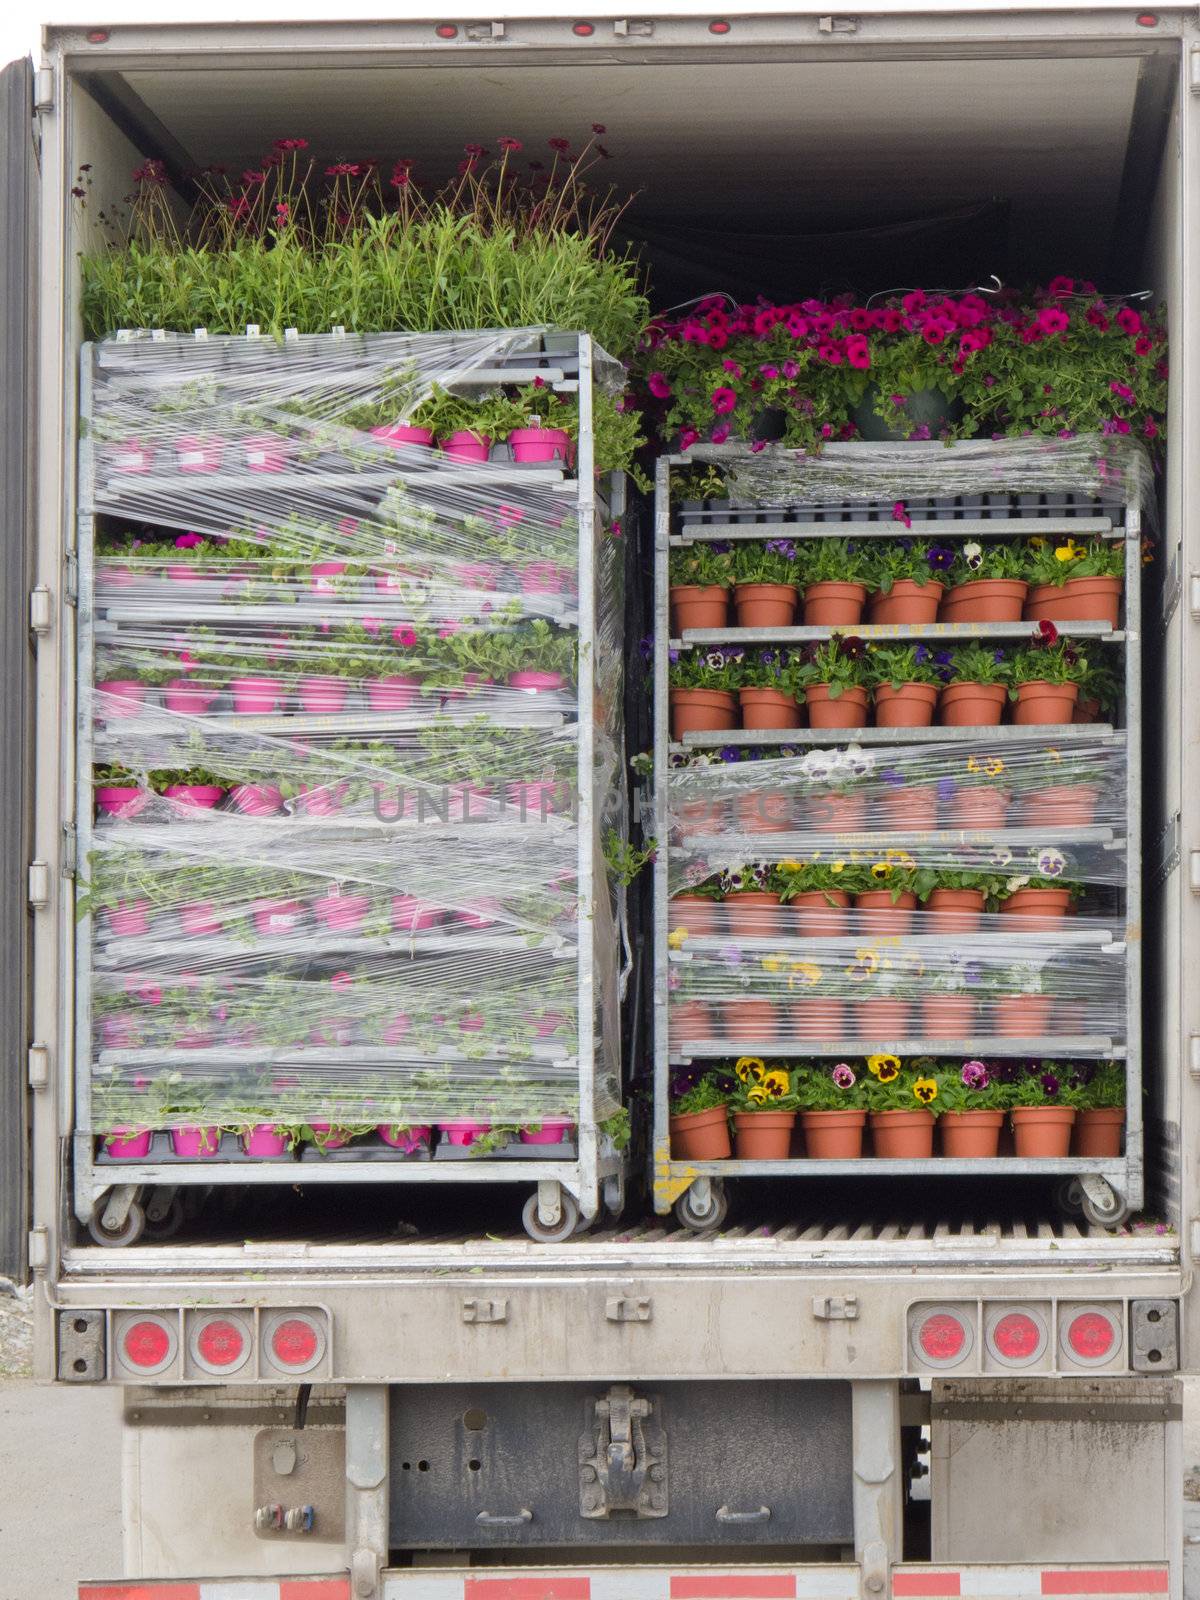 View into the back of an open delivery truck wih pallets stacked with rows of flowering pot plants being distributed to retail outlets from a nursery